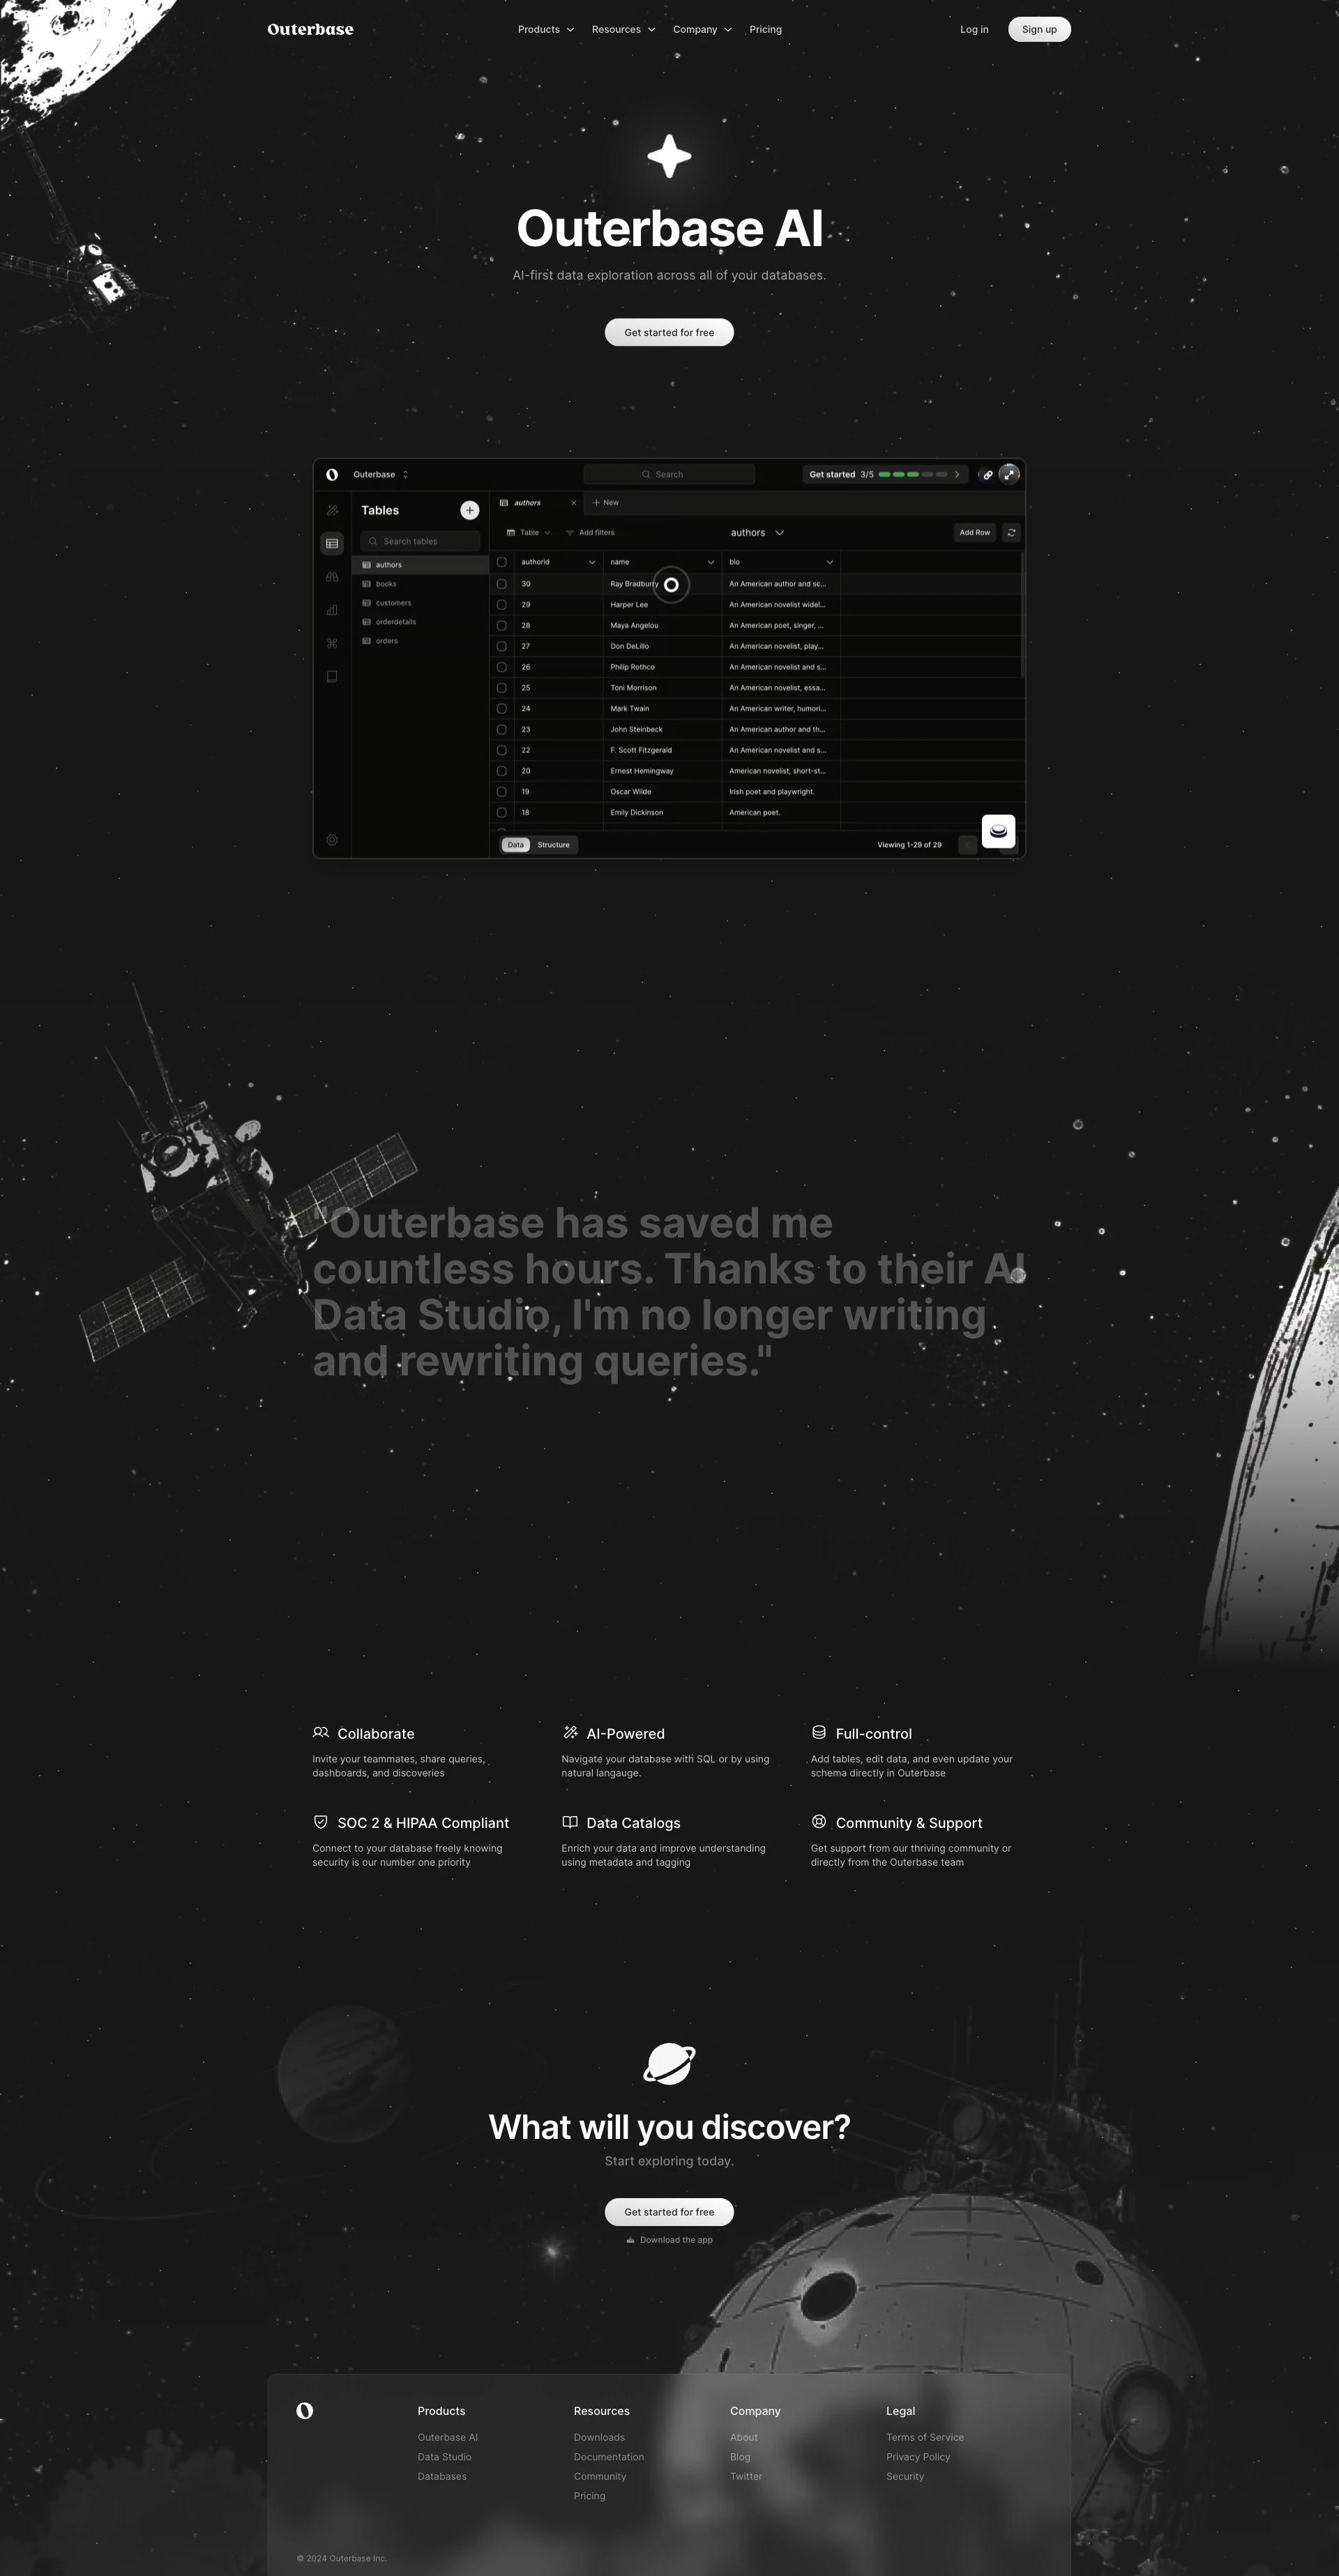 Outerbase Landing Page Example: Navigate your data with AI. Effortlessly manage and explore your database with AI, no expertise needed. Collaborate seamlessly for a smarter data experience.